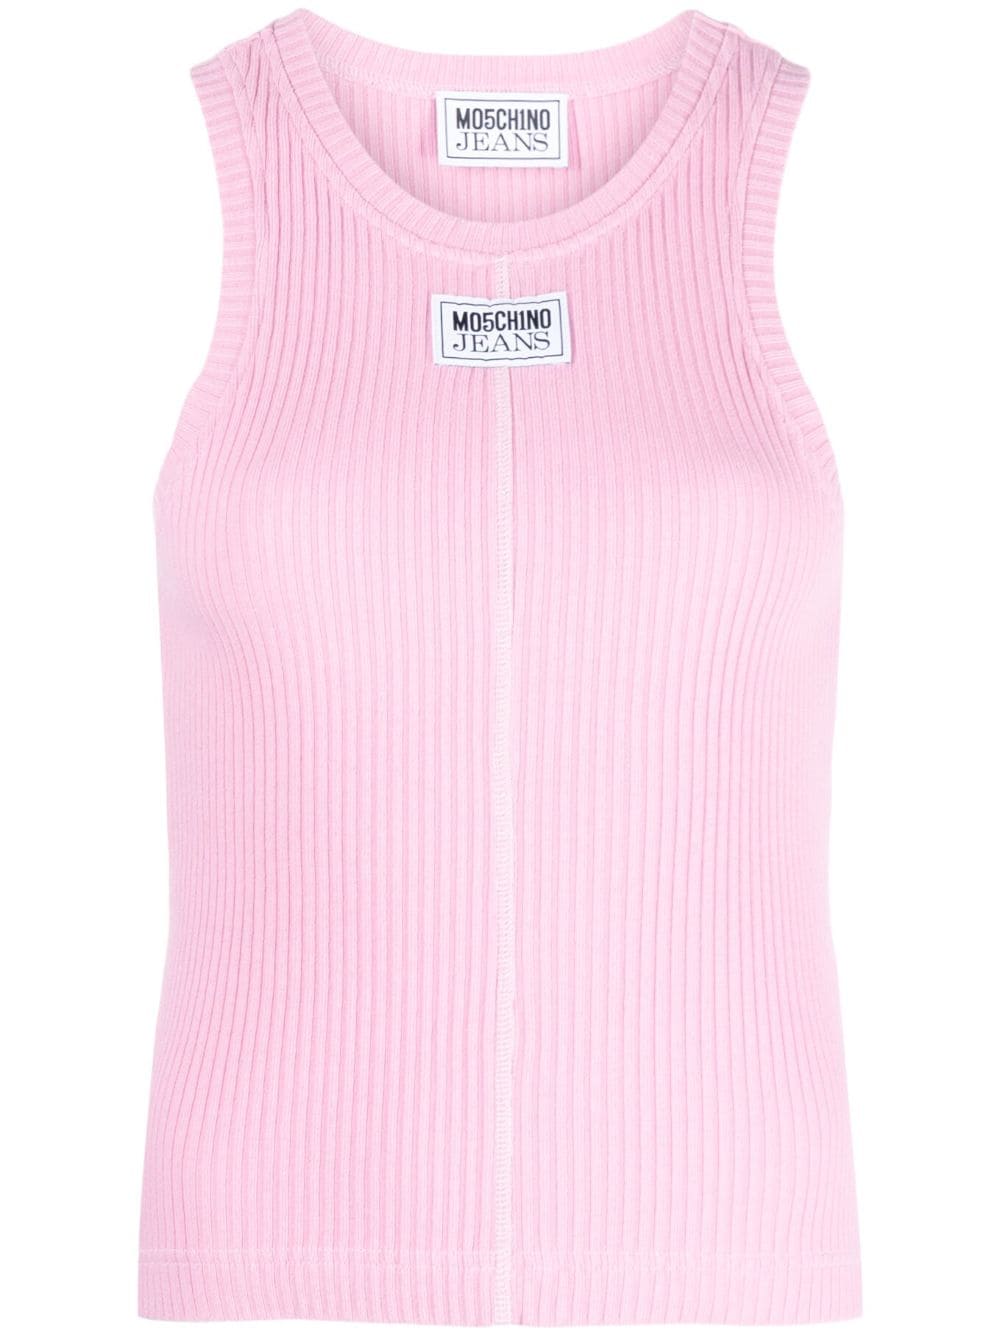 MOSCHINO JEANS ribbed cotton tank top - Pink